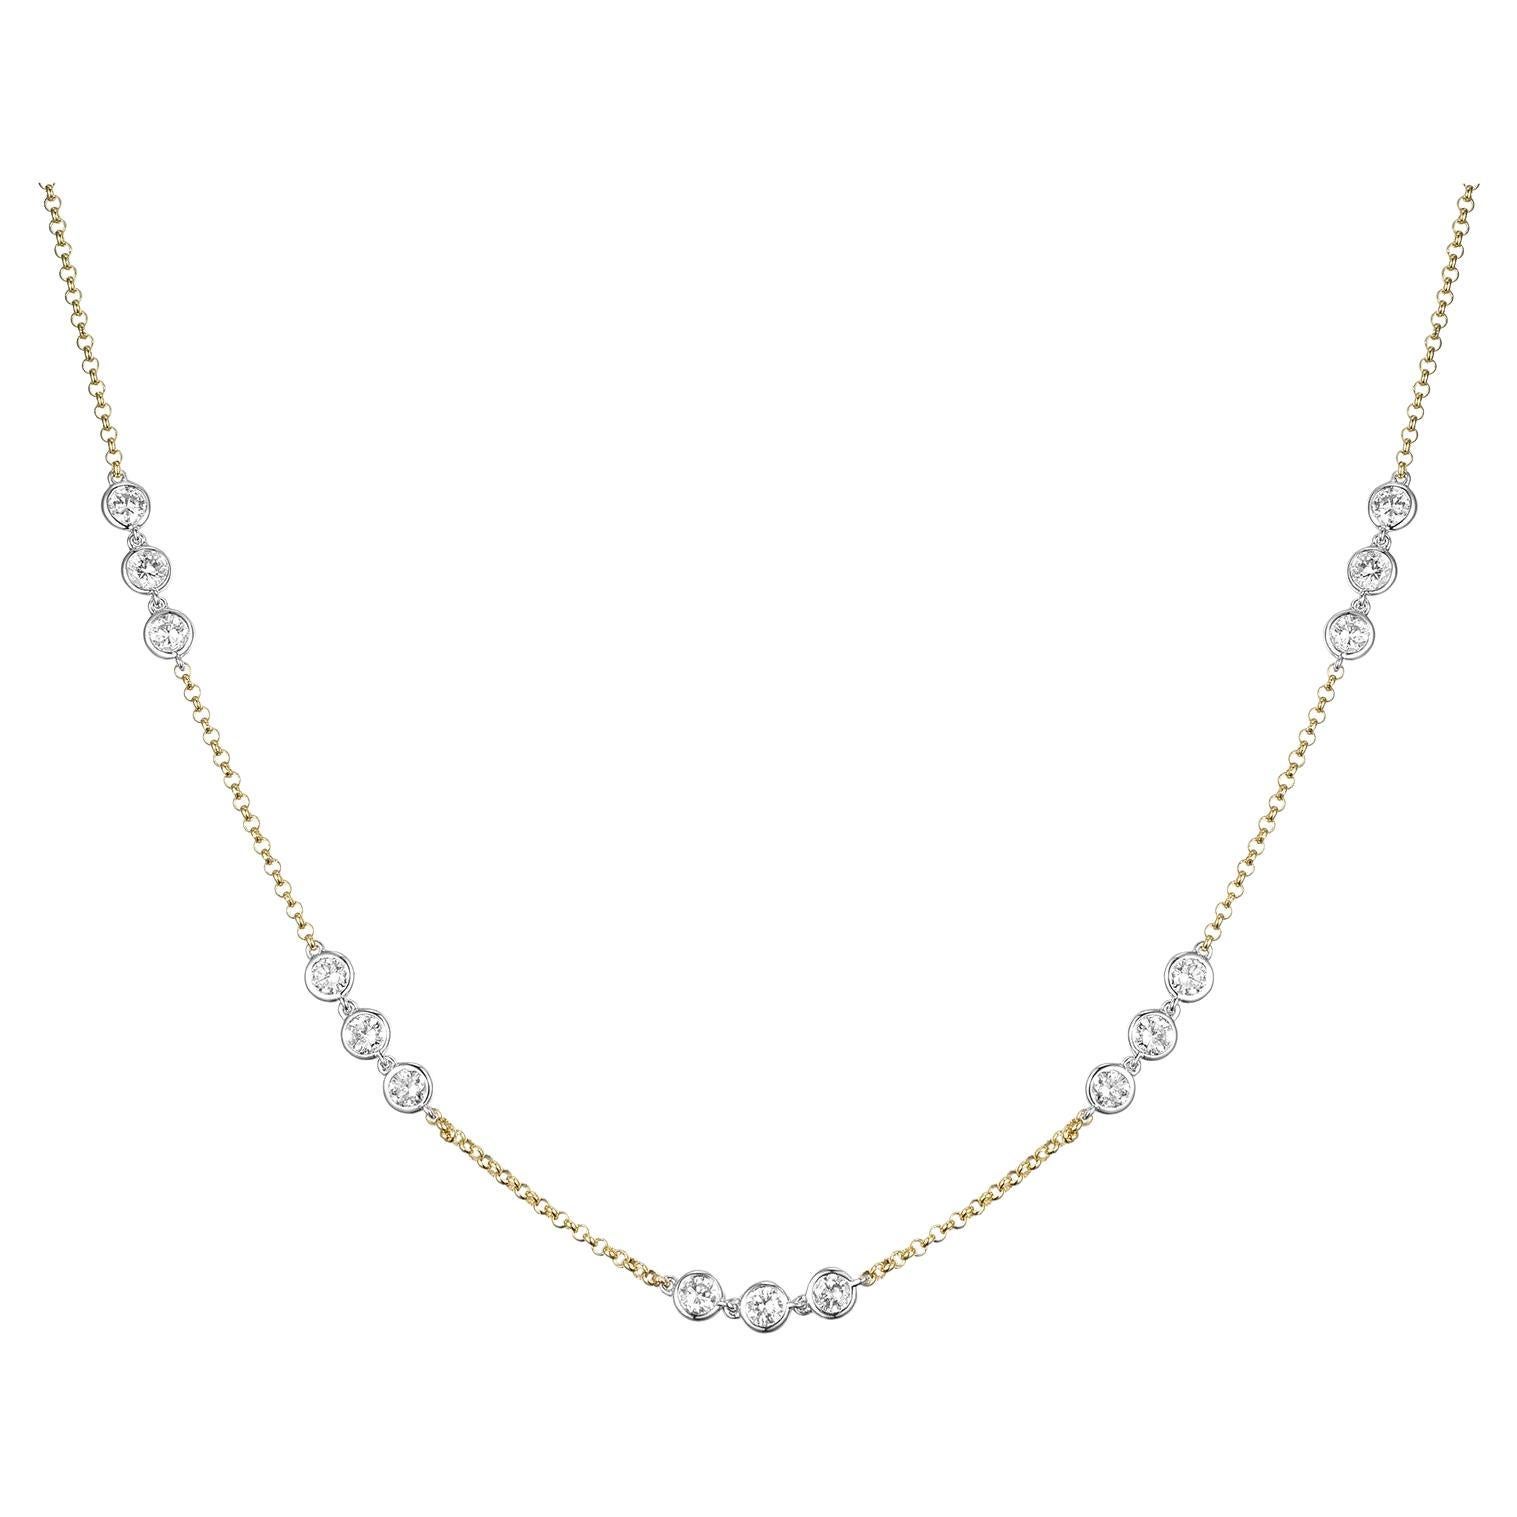 3.6 Carat 29-Station Diamond by The Yard Necklace in 18 Karat Gold